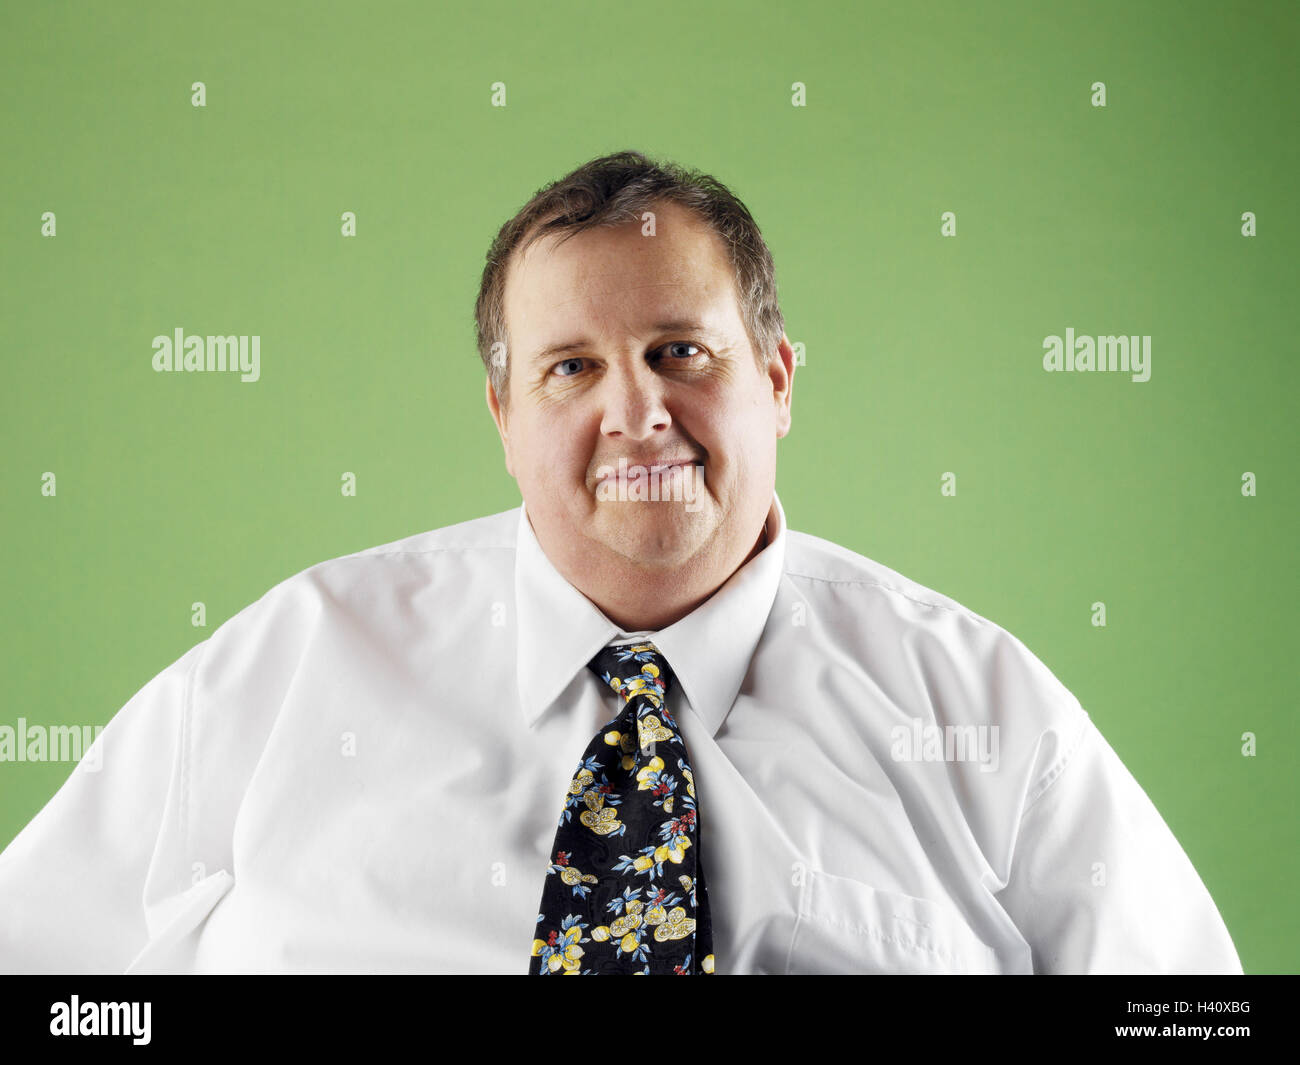 Man, overweight, smile, portrait, middle old person, friendly, thickly, bold, overweight, fatly, adiposity, obesity, obesity, perimetre, voluminously, body perimetre, body weight, unhealthily, shirt, shirt, tie, tie, studio, Stock Photo